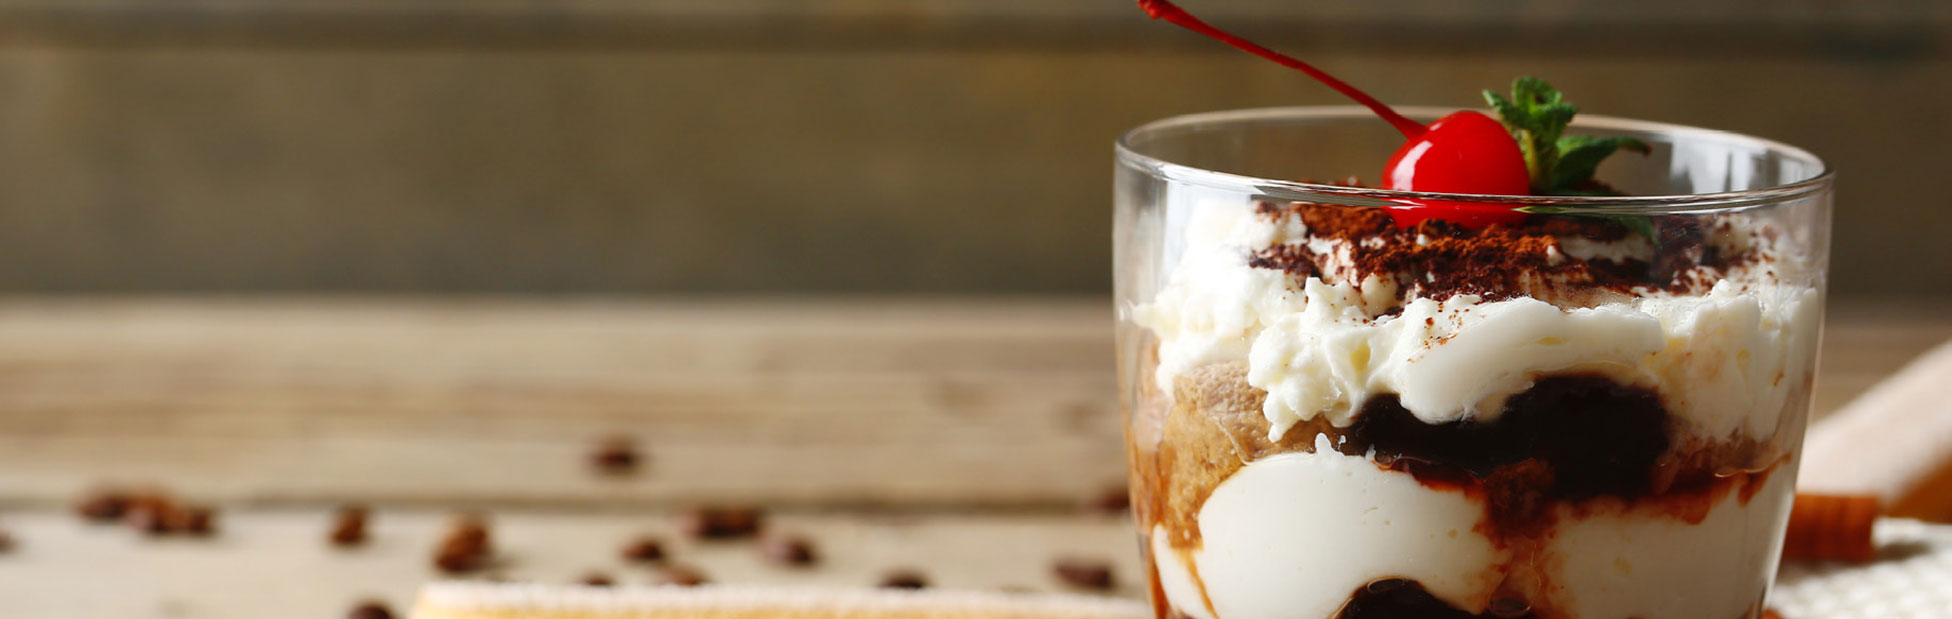 A chocolate and cream desert in a glass with a cherry on top